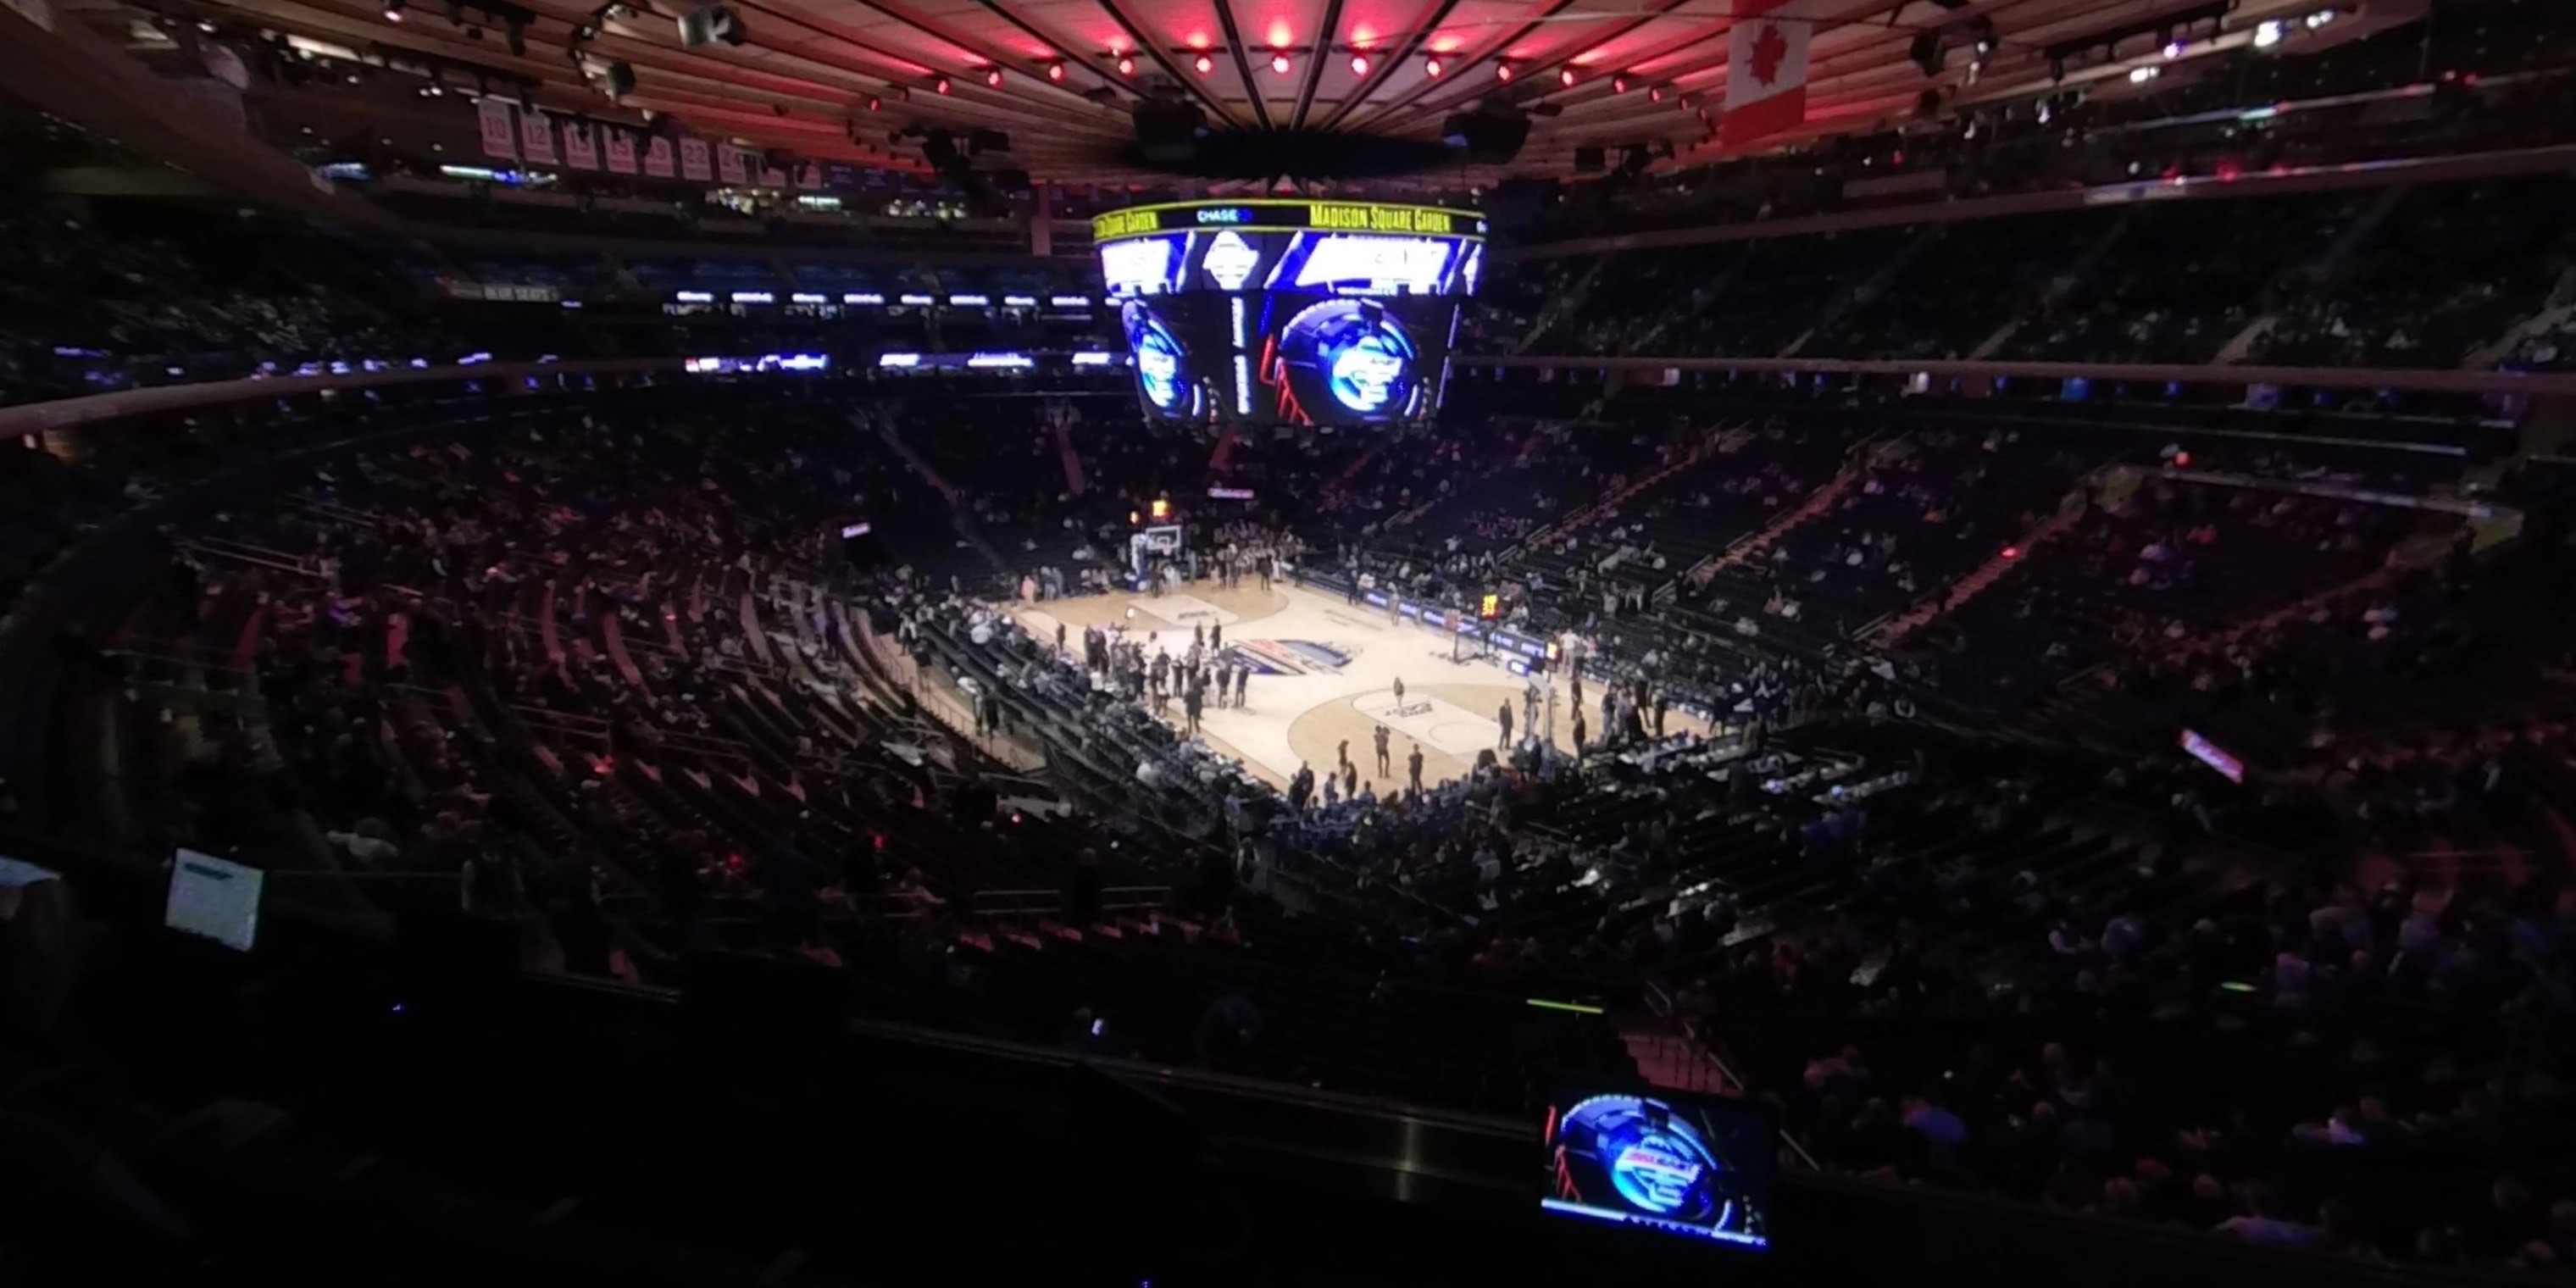 section 201 panoramic seat view  for basketball - madison square garden